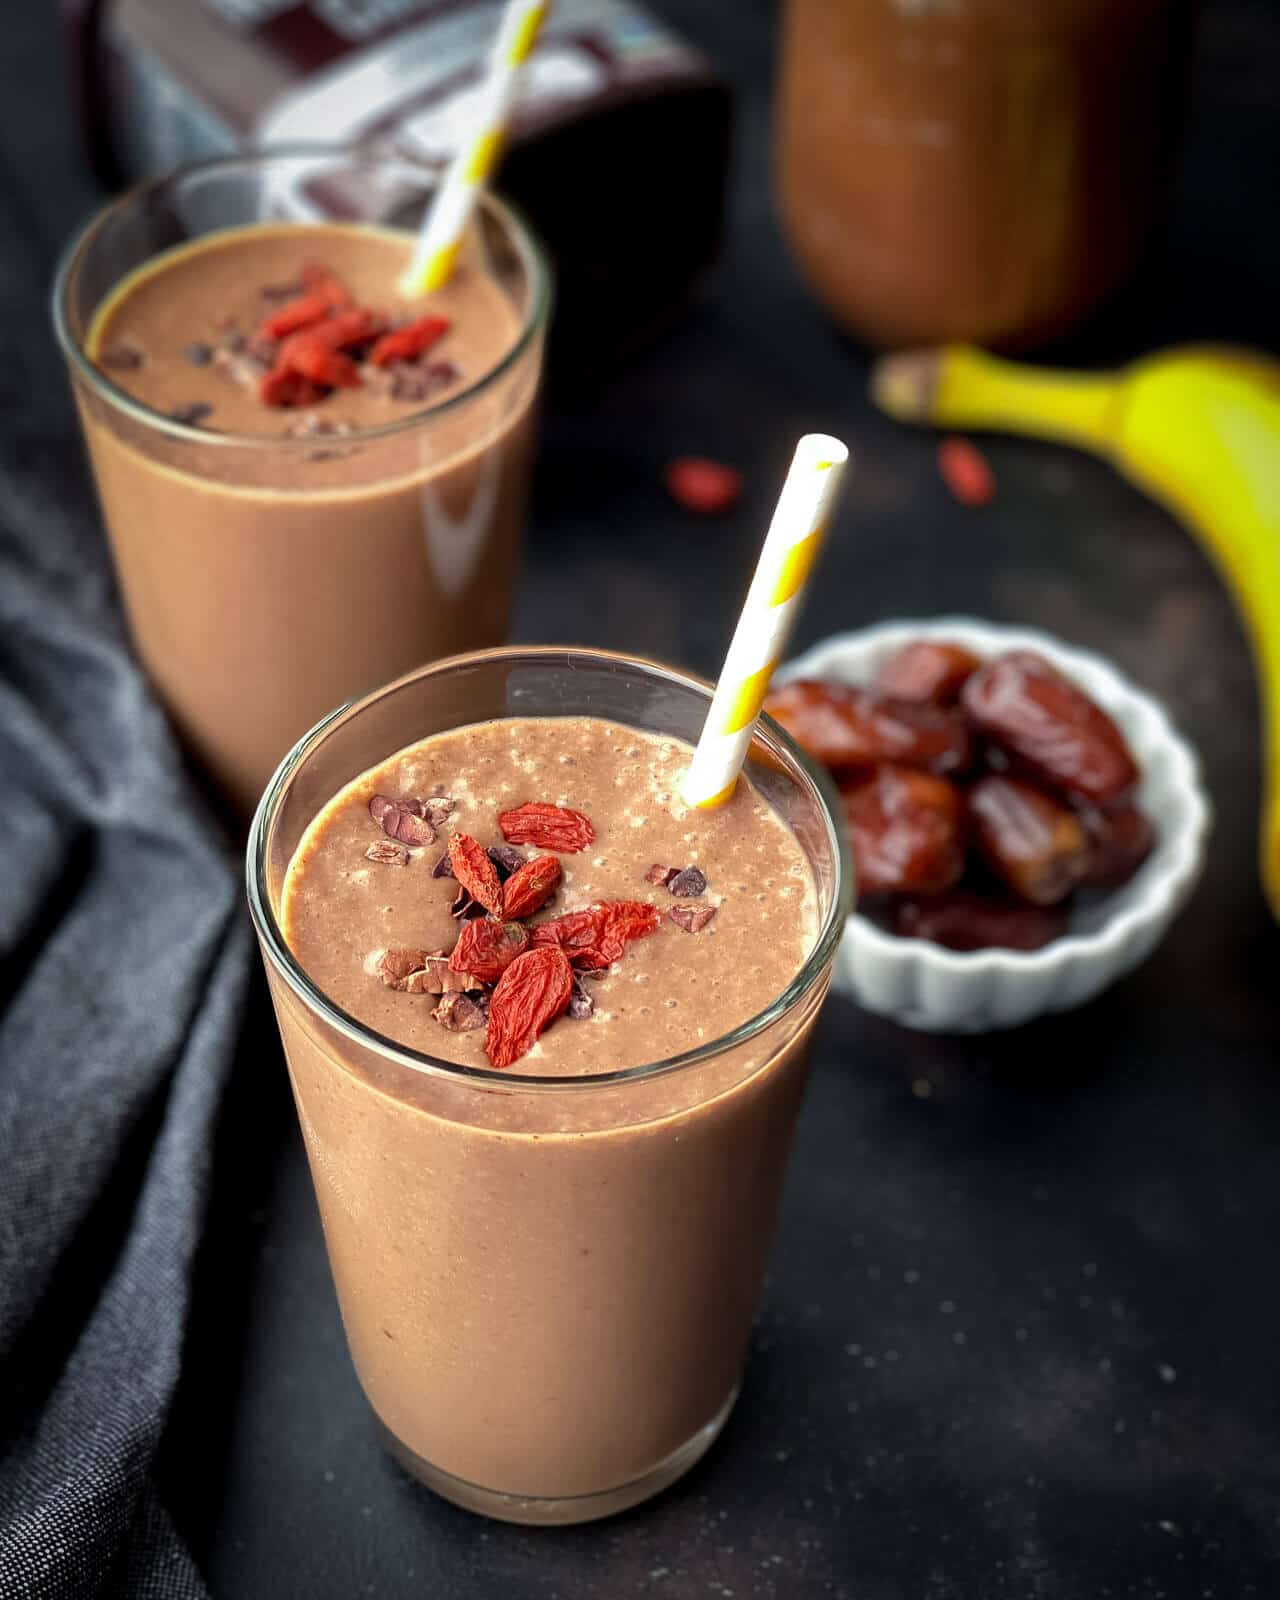 A chocolate date smoothie in the front with goji berries on top. A small white bowl of dates behind the front smoothie with a banana and an additional smoothie to the left on a black counter.